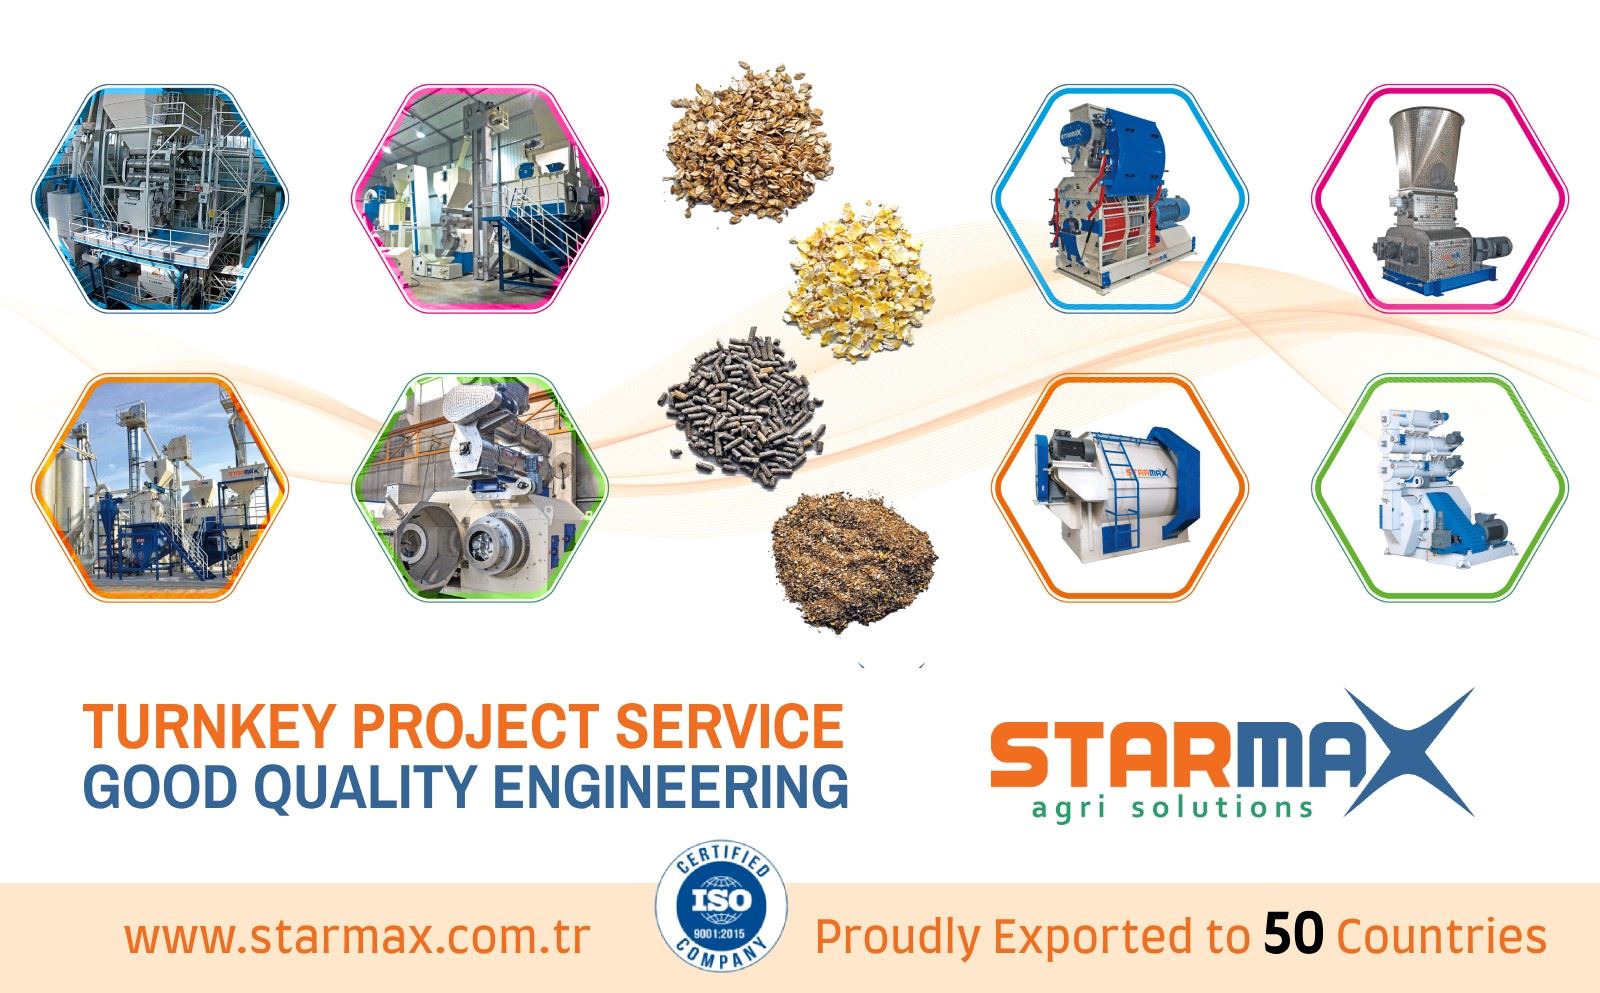 We provide turnkey services from farm-type solutions to industrial projects